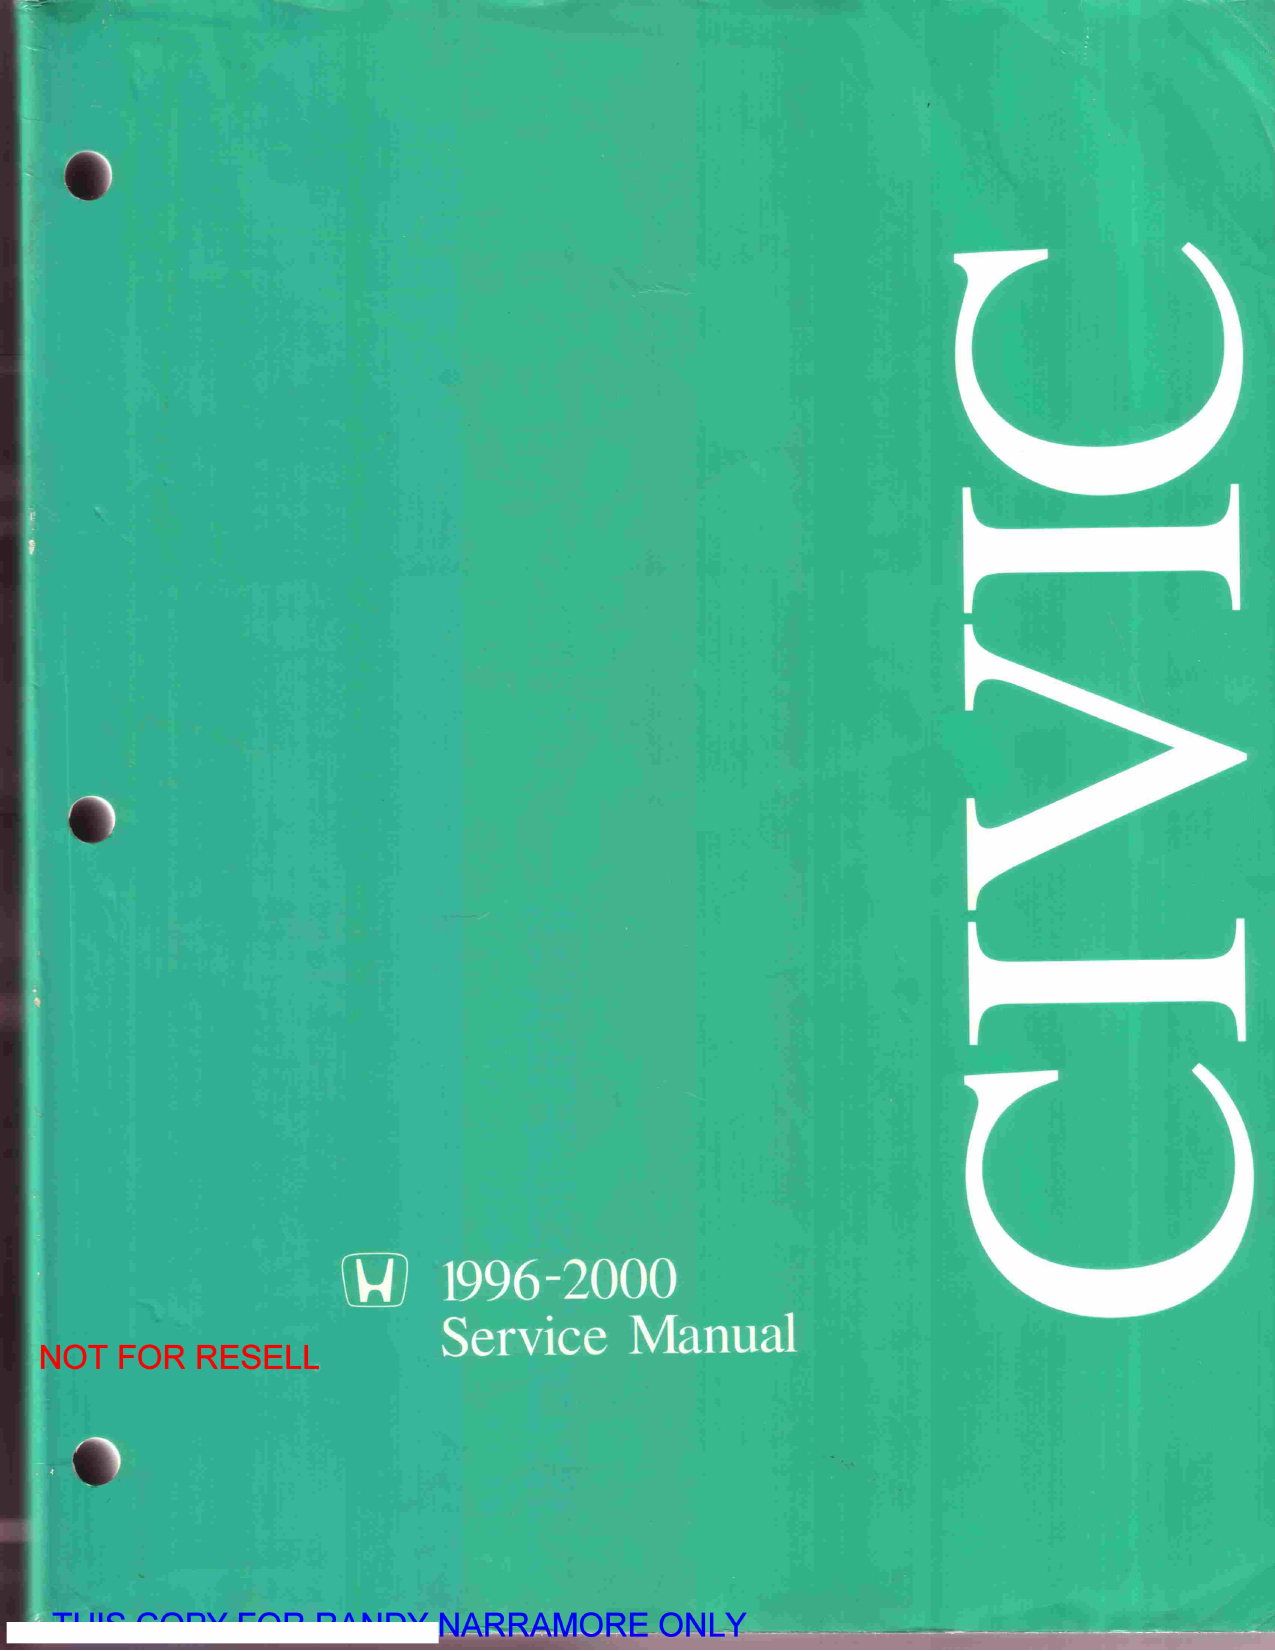 Honda Civic Service Manual ManualsLib Makes It Easy To Find Manuals line